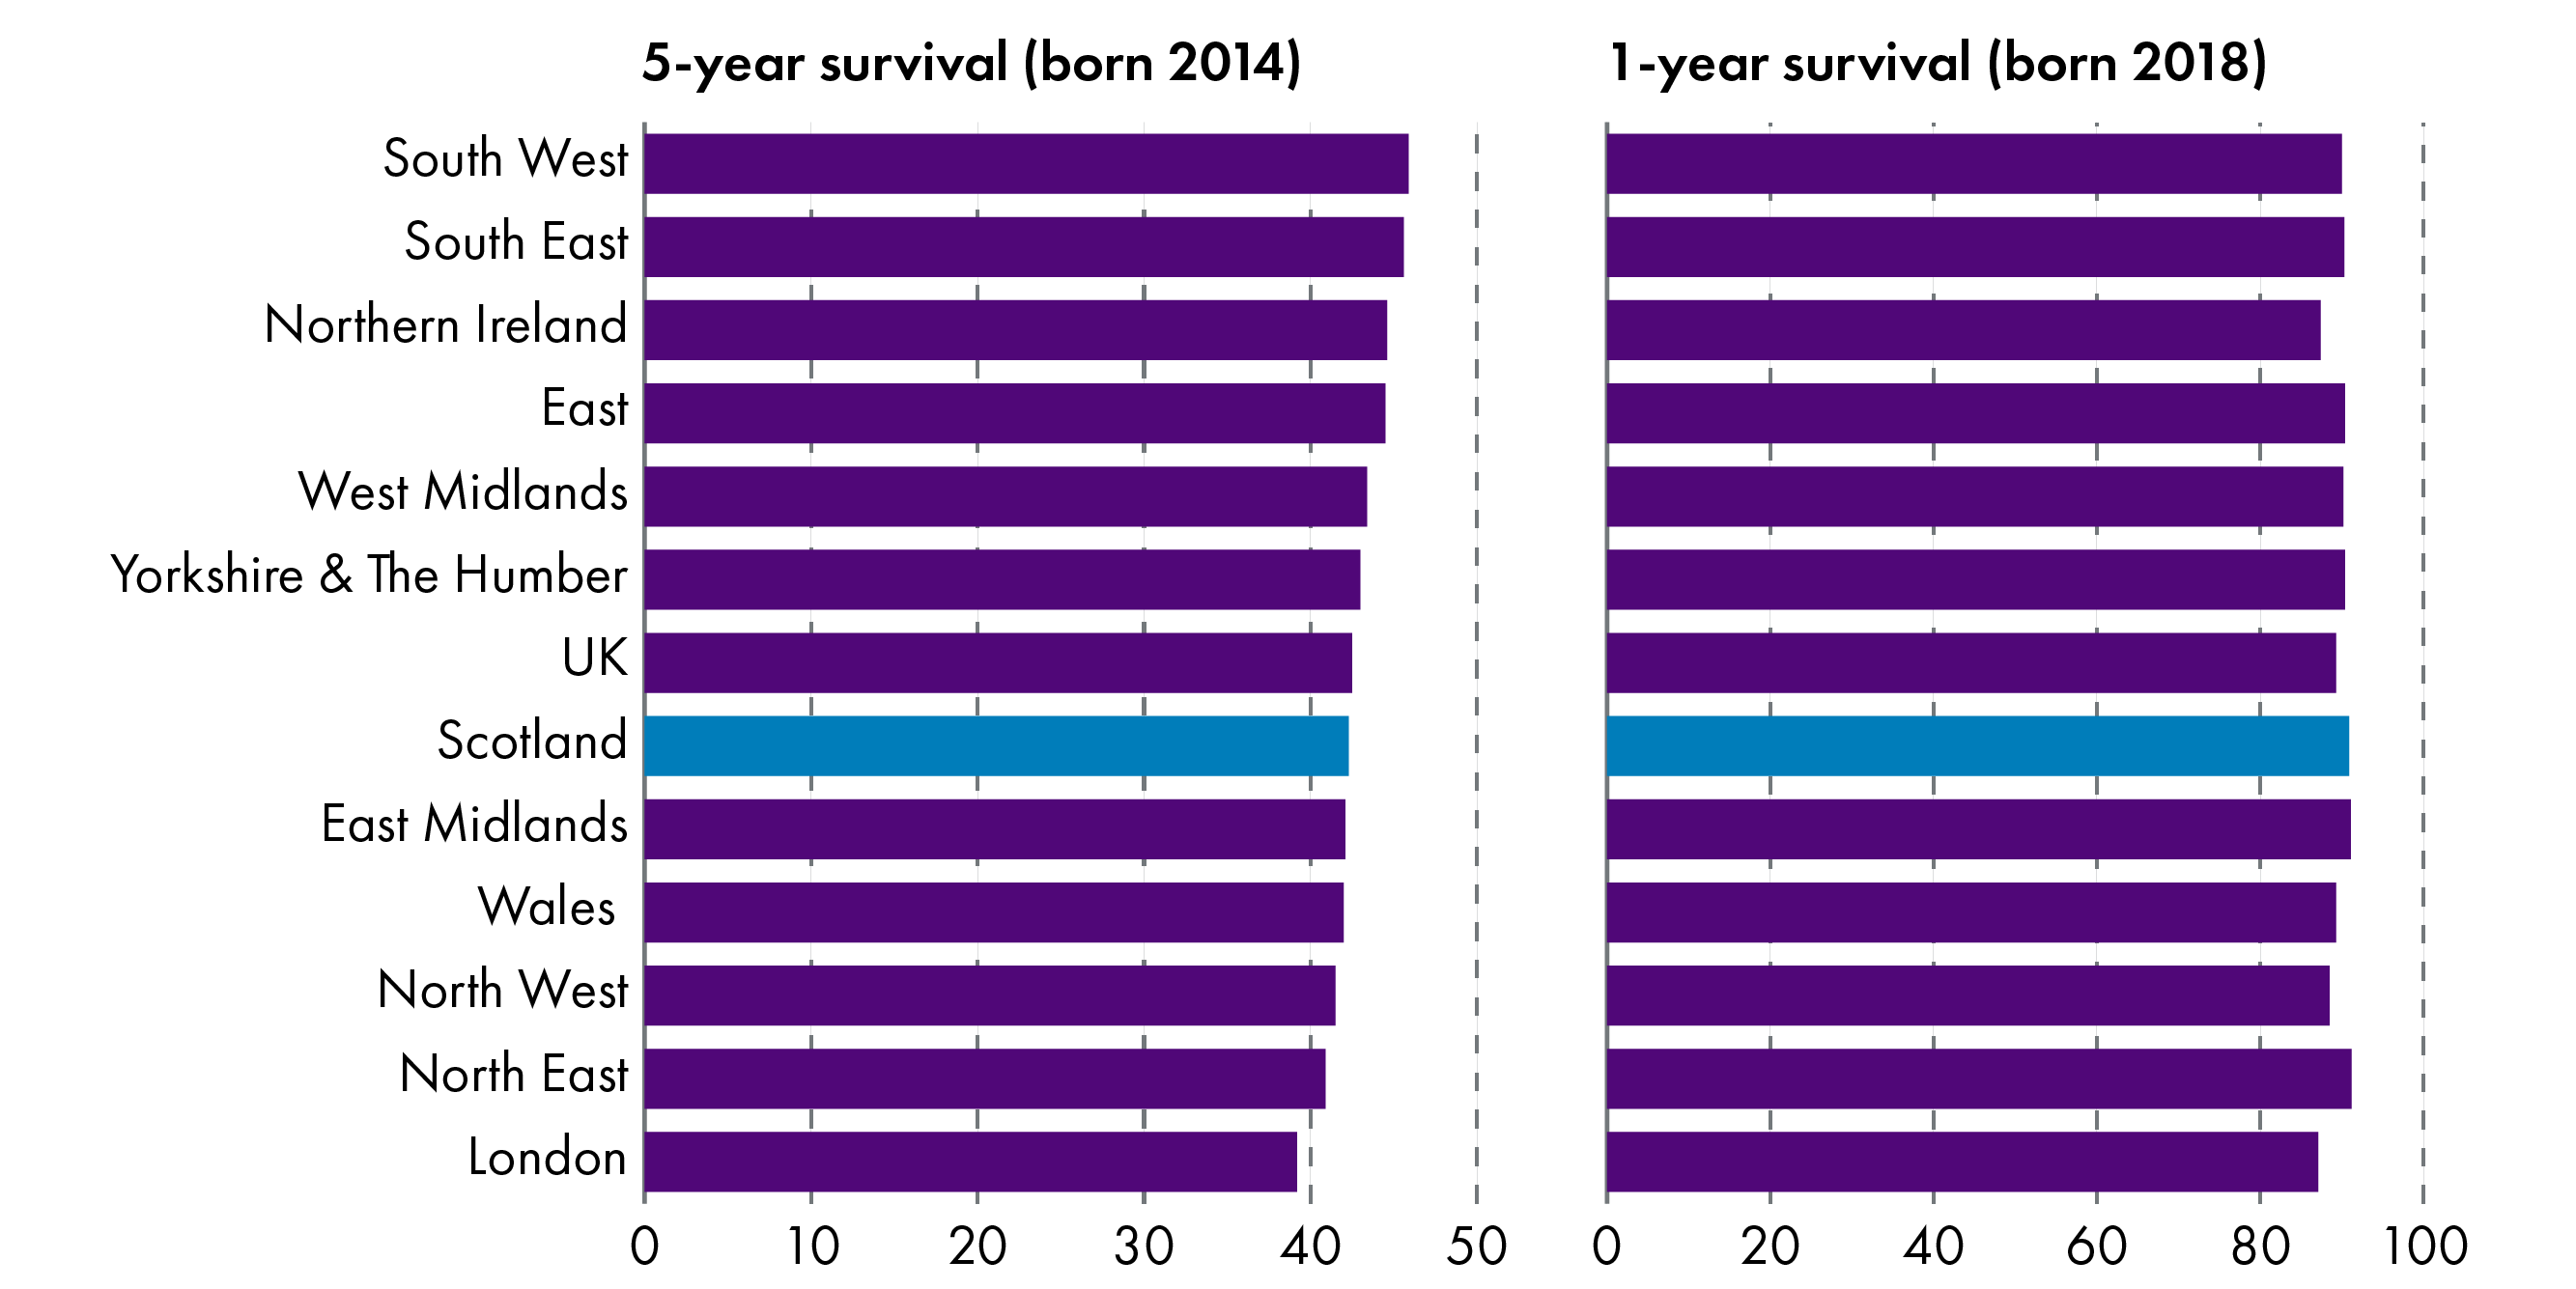 Business survival rates across the UK nations and regions for businesses born in 2014 and 2018